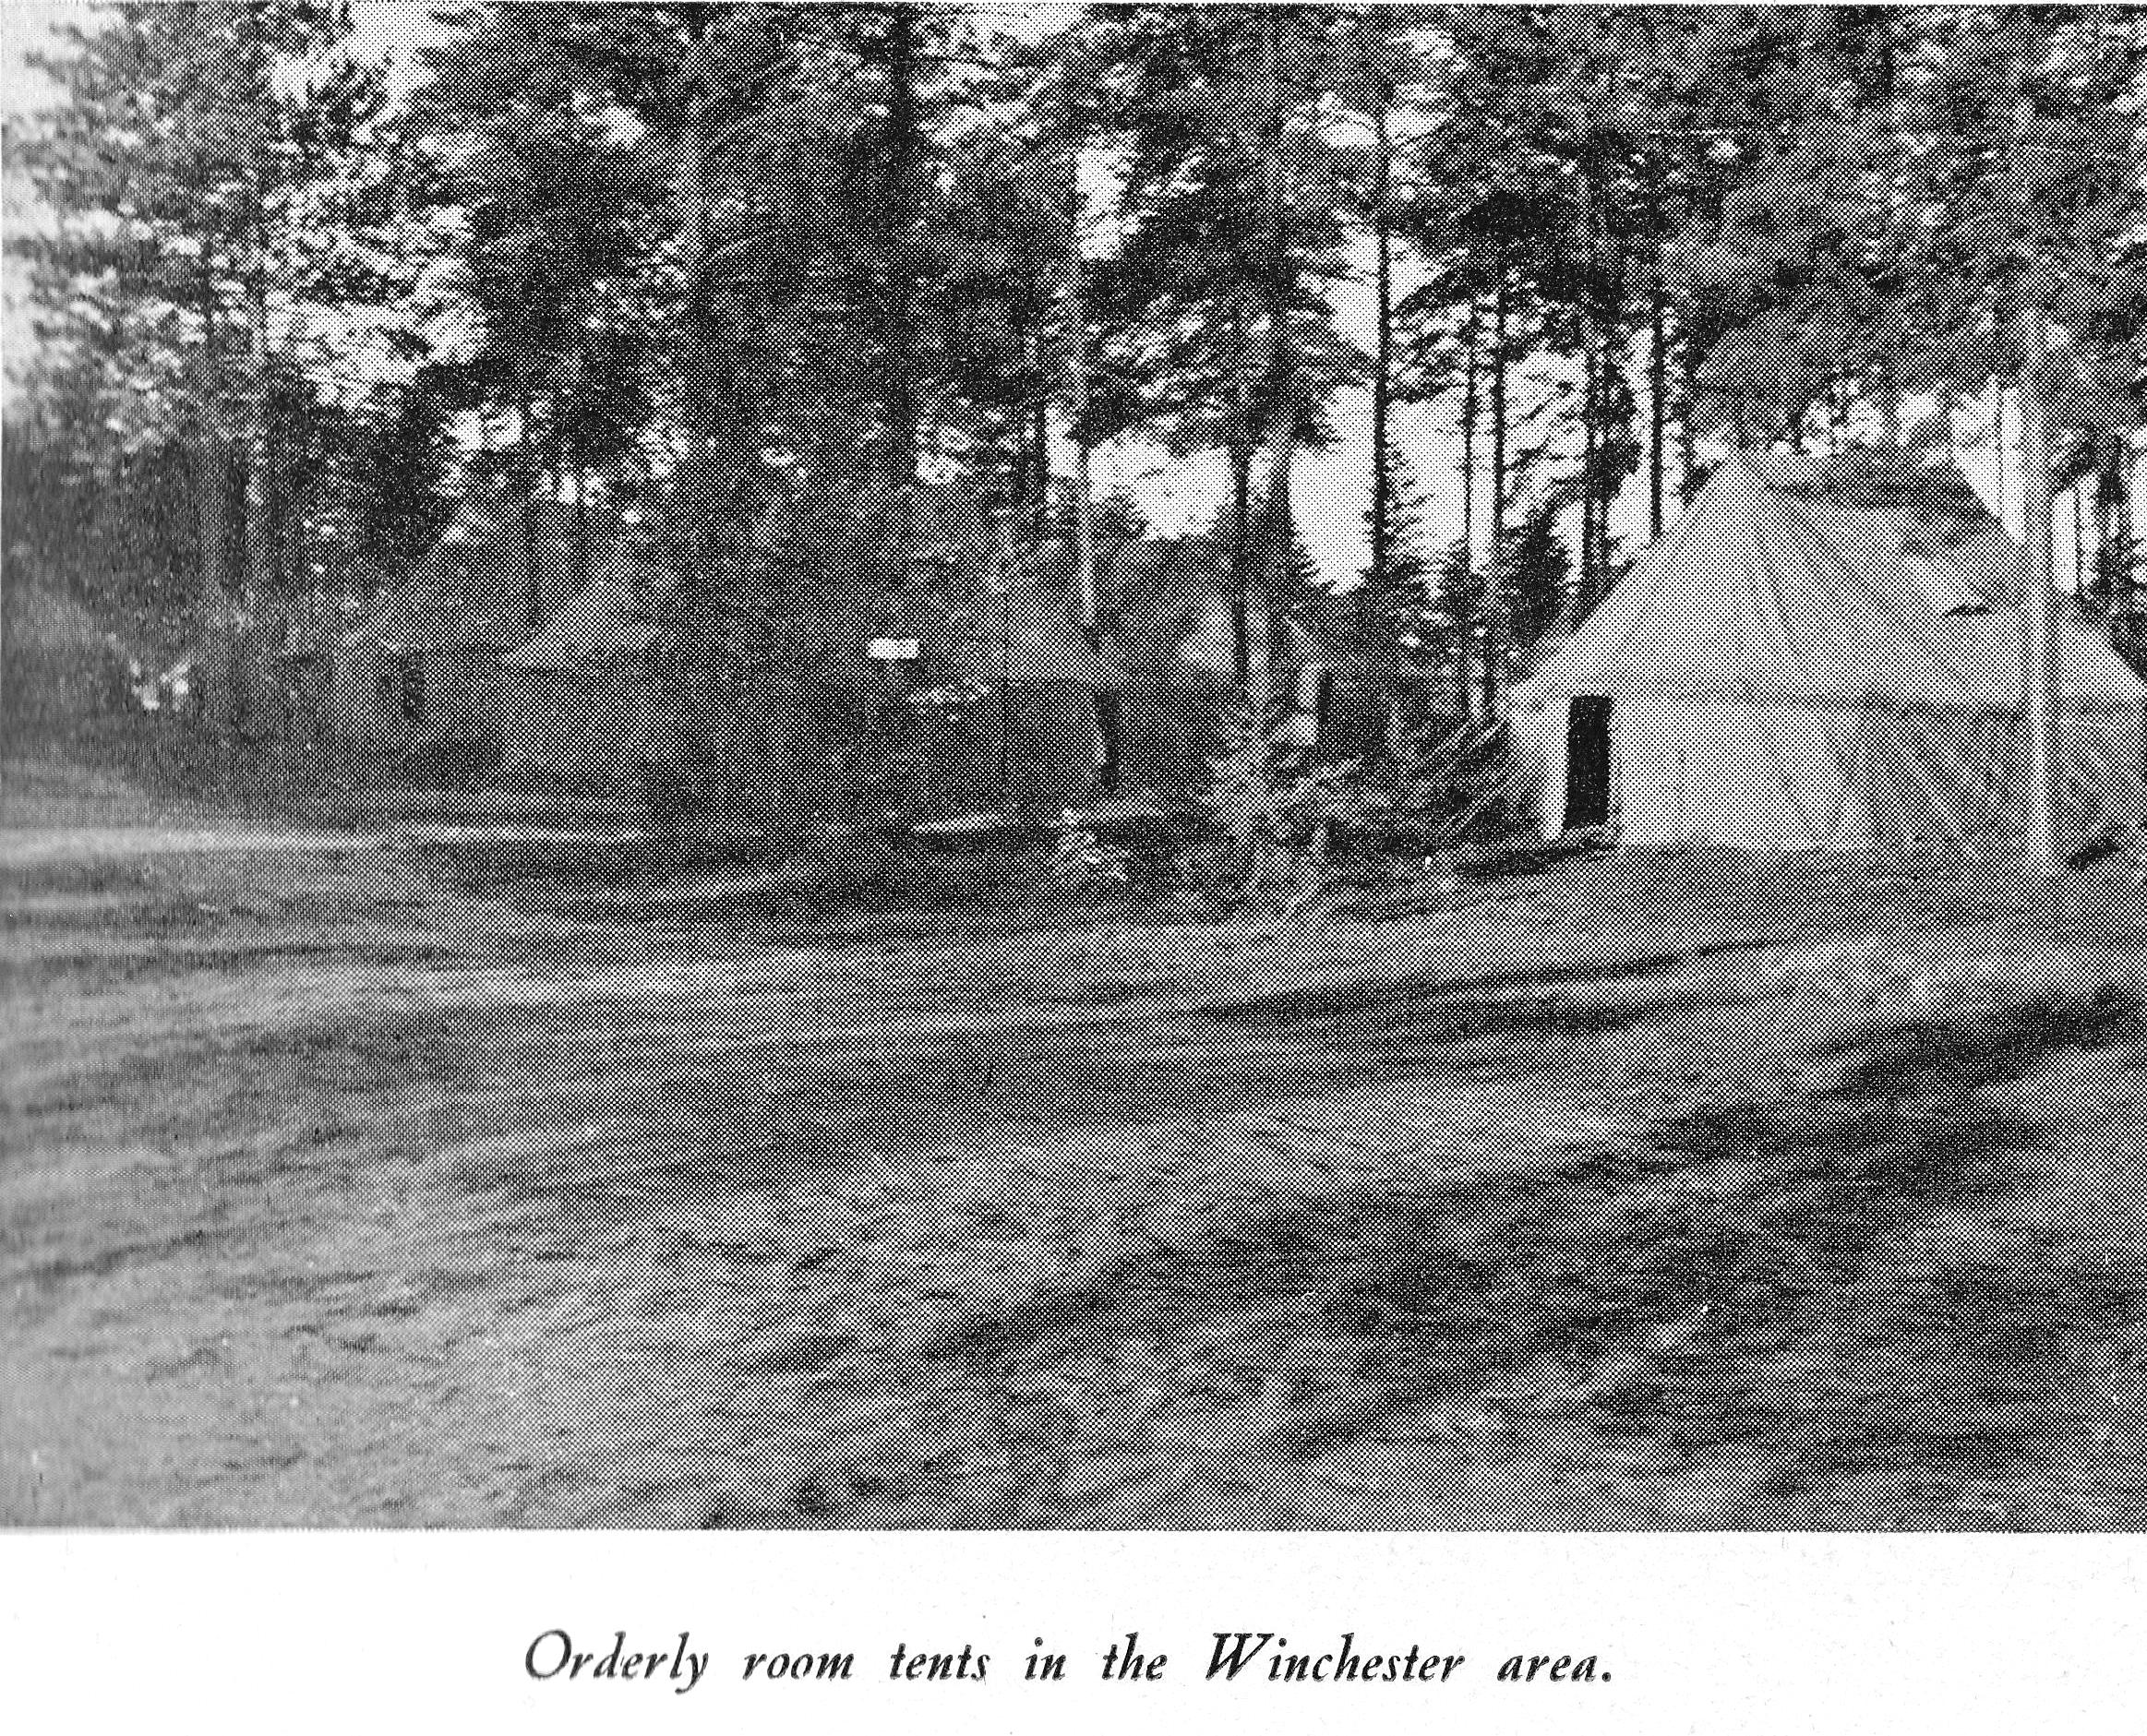 orderly room tents in the Winchester area